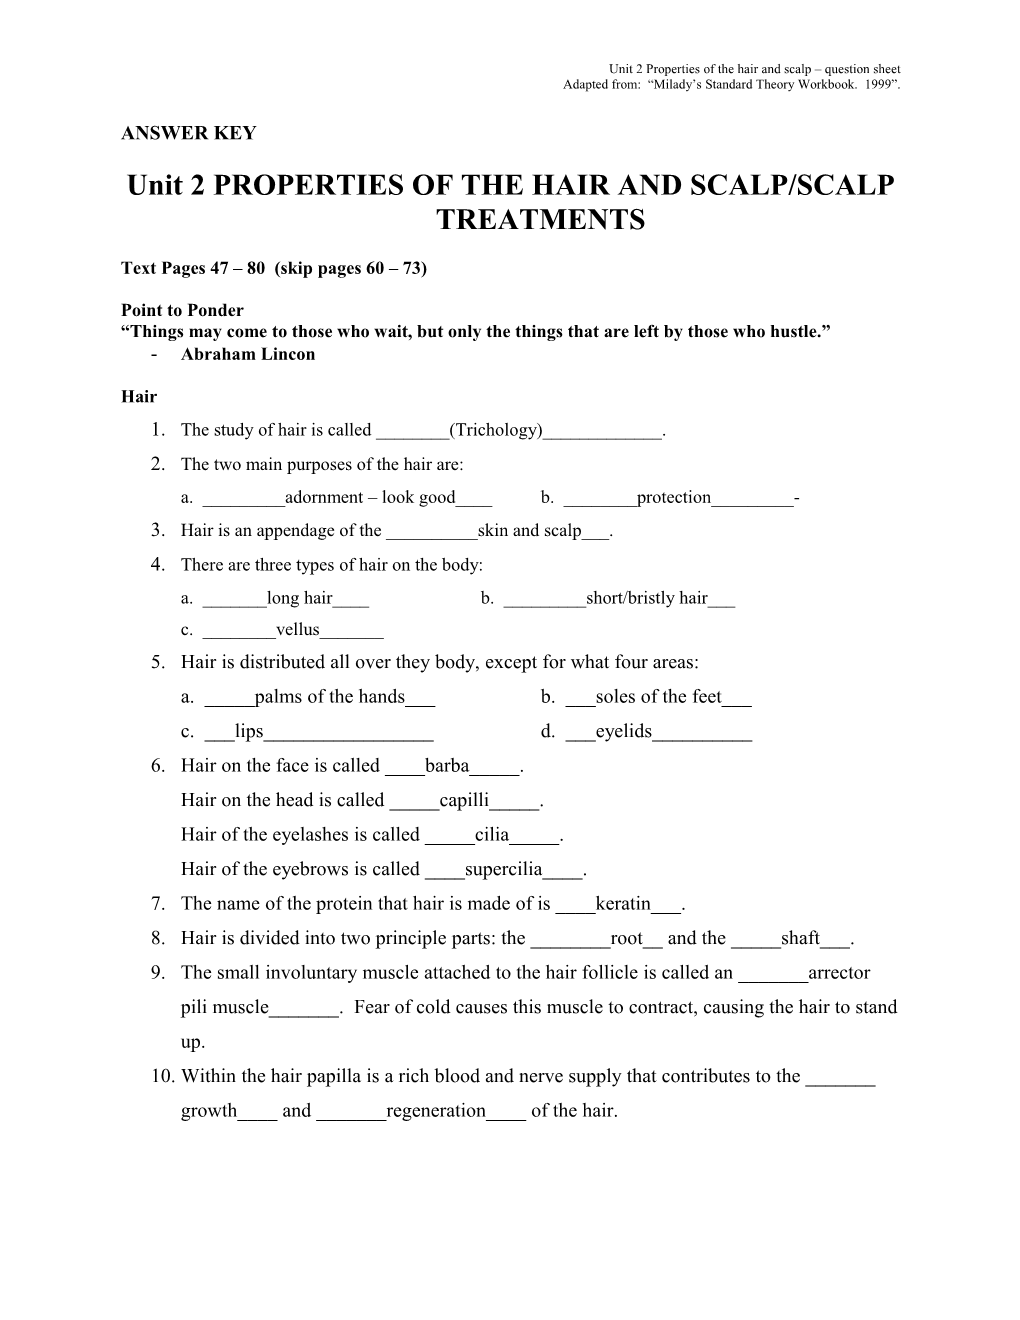 Unit 2 Properties of the Hair and Scalp Question Sheet